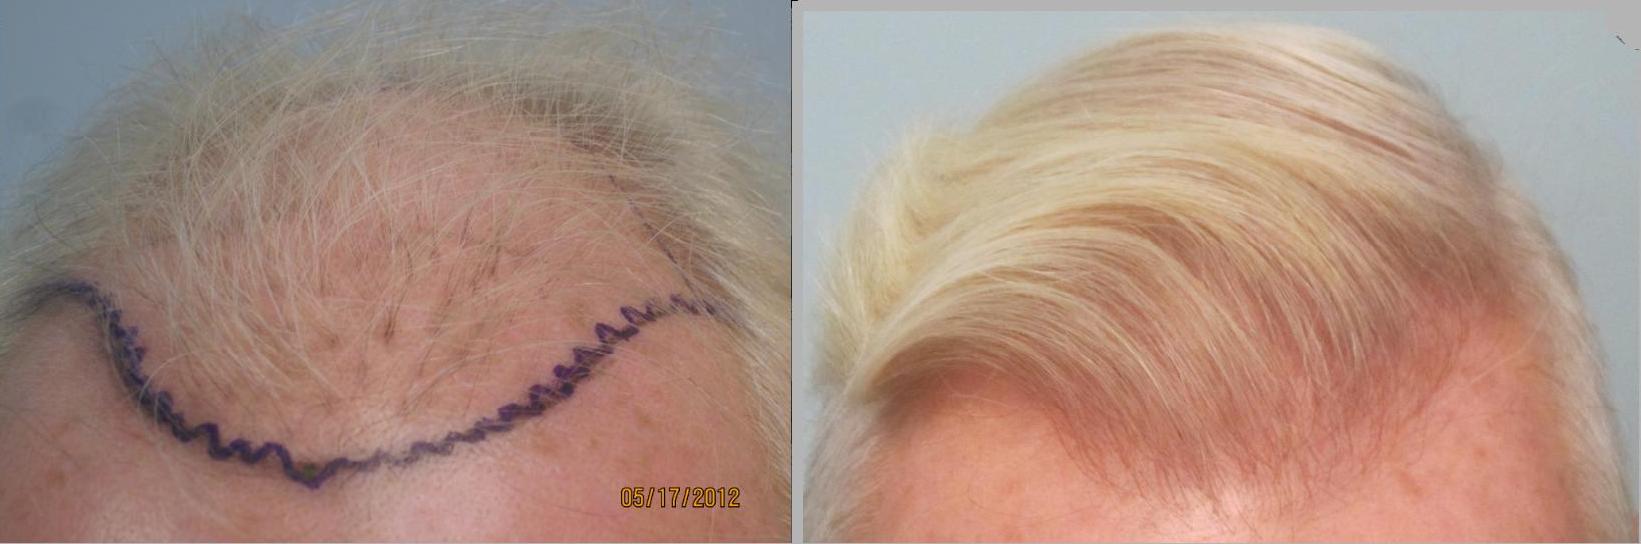 2,608 grafts placed from the frontal hairline till midscalp. Front closeup view. Patient had a prior hair transplant that looked pluggy and sparse and was repaired by Dr Sean Behnam. Please notice how natural and thick the hairline looks.